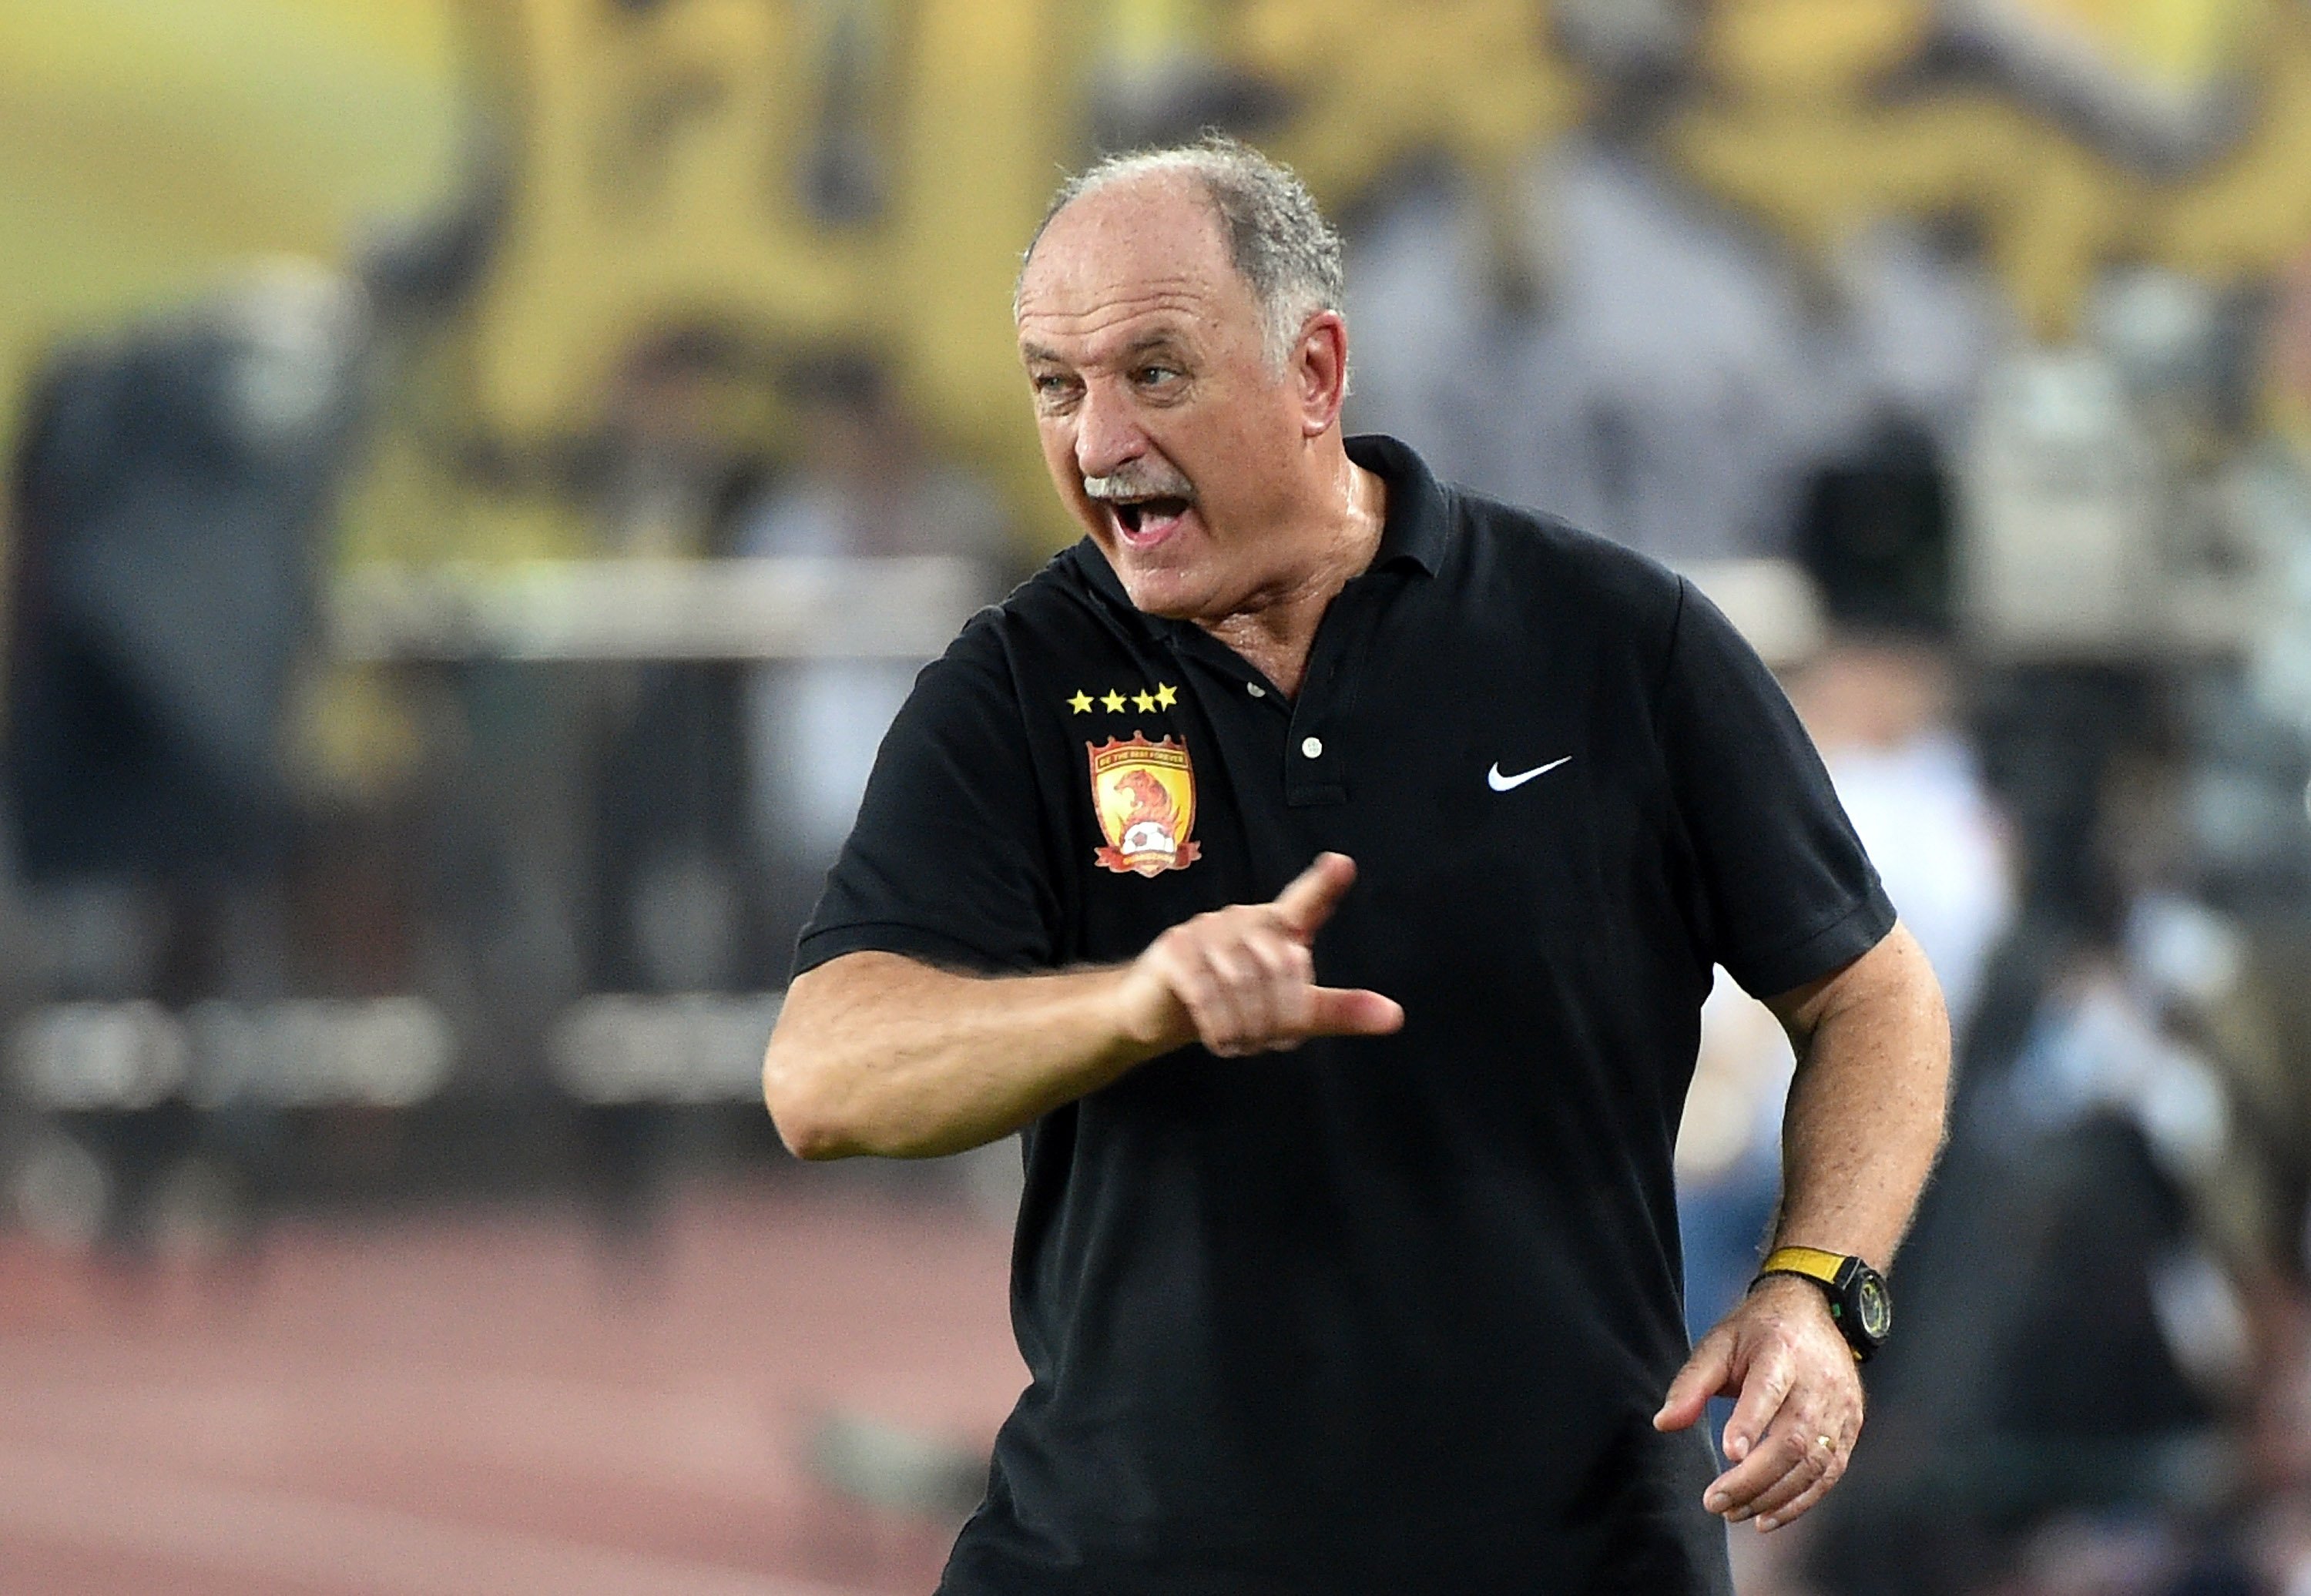 Guangzhou Evergrande coach Luiz Felipe Scolari is on the brink of steering the four-time Chinese Super League champions into the final of the AFC Champions League. Photos: Xinhua